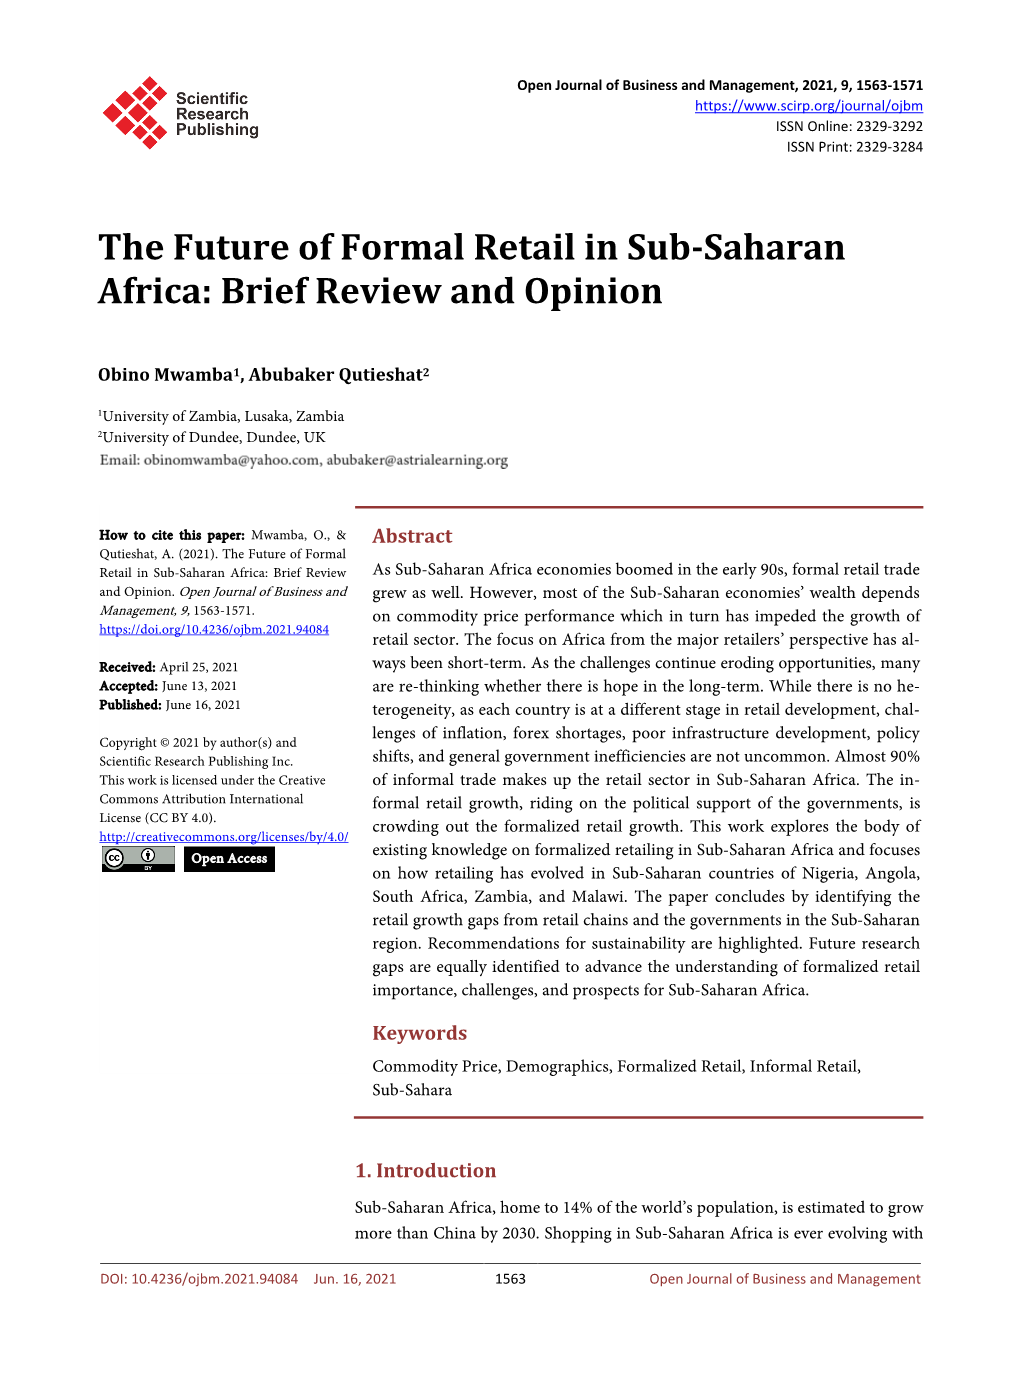 The Future of Formal Retail in Sub-Saharan Africa: Brief Review and Opinion